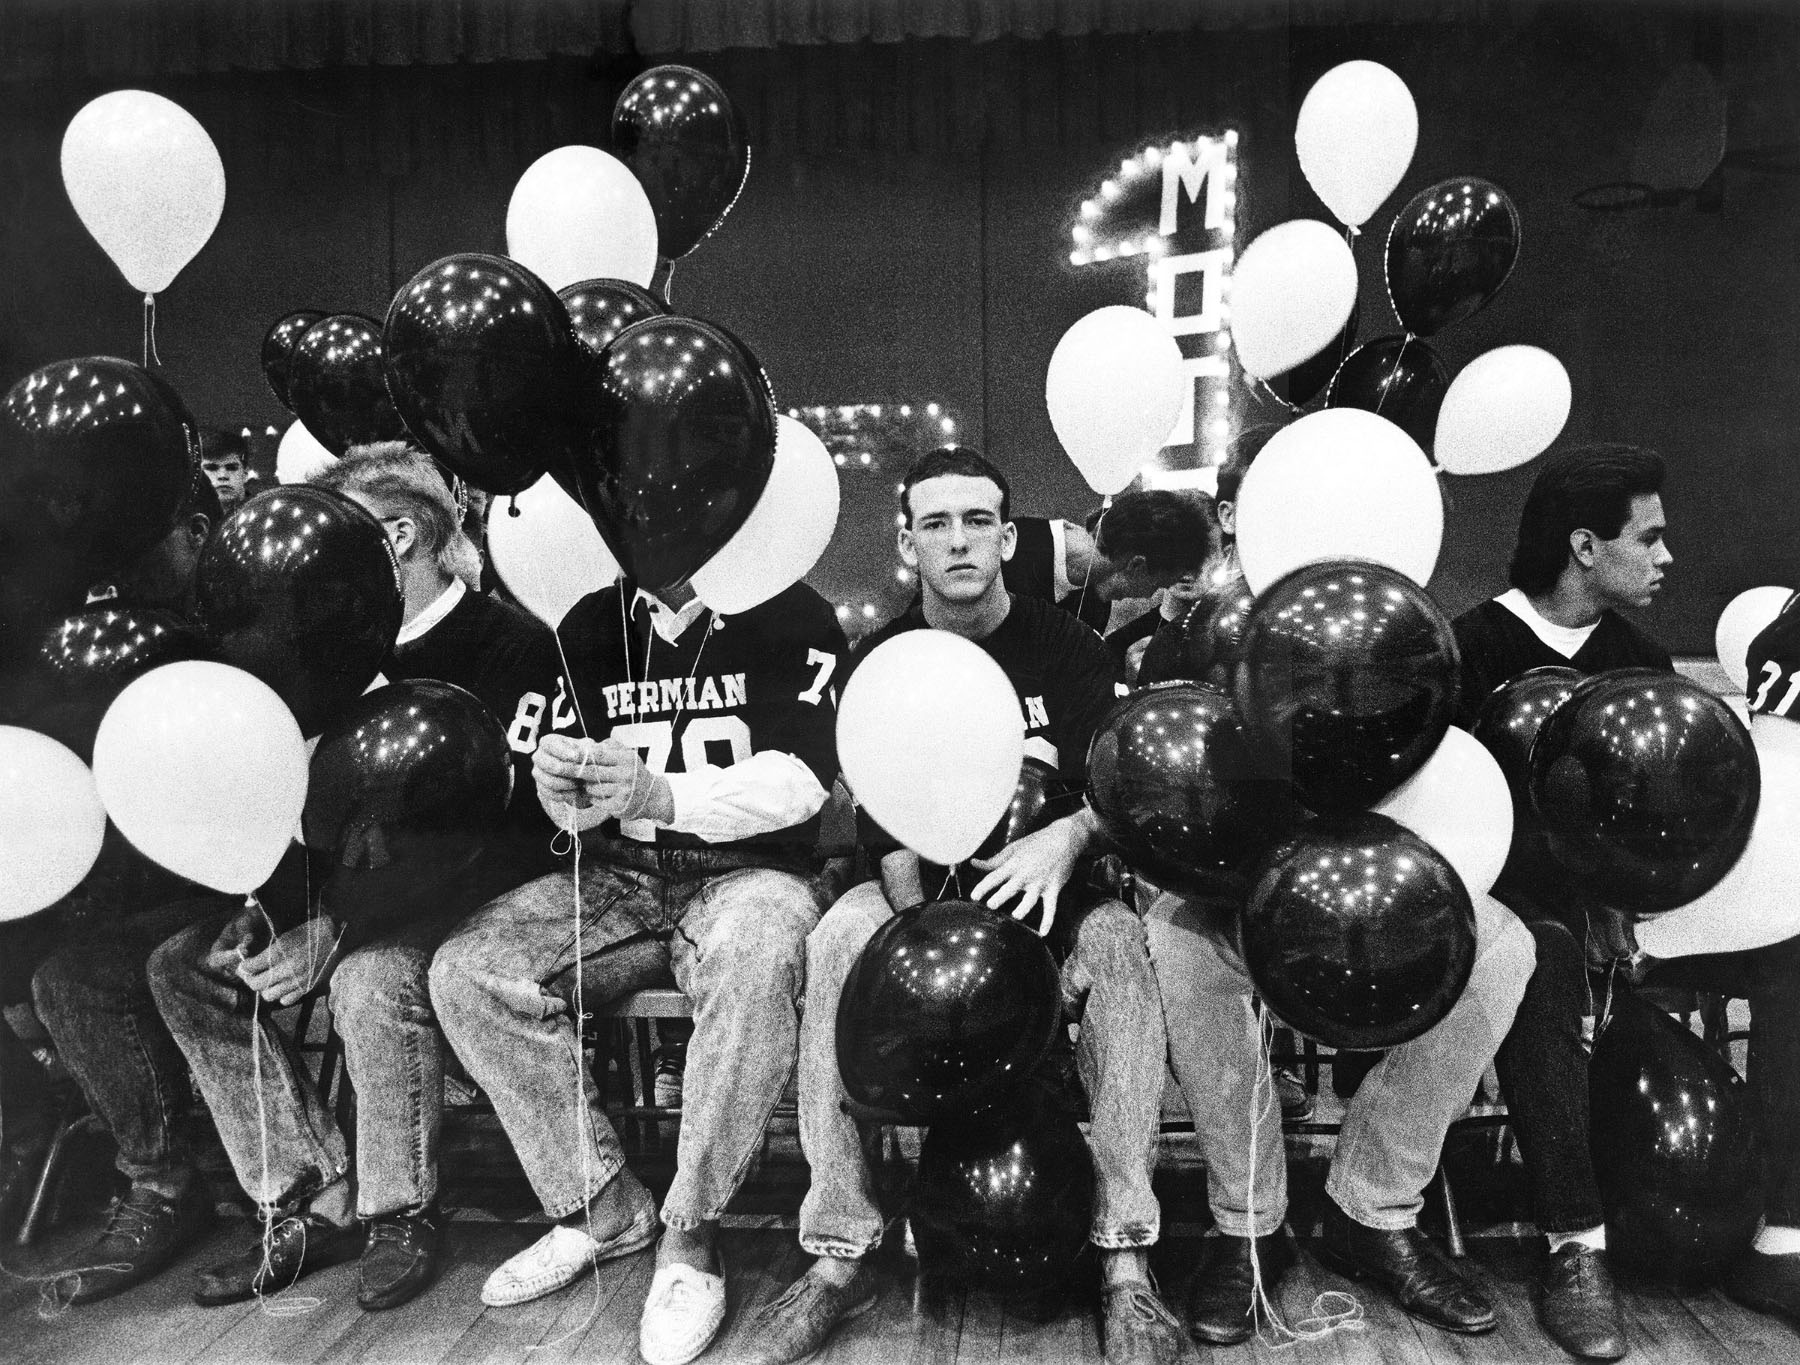 A young man looks straight-faced at the camera surrounded by black and white balloons